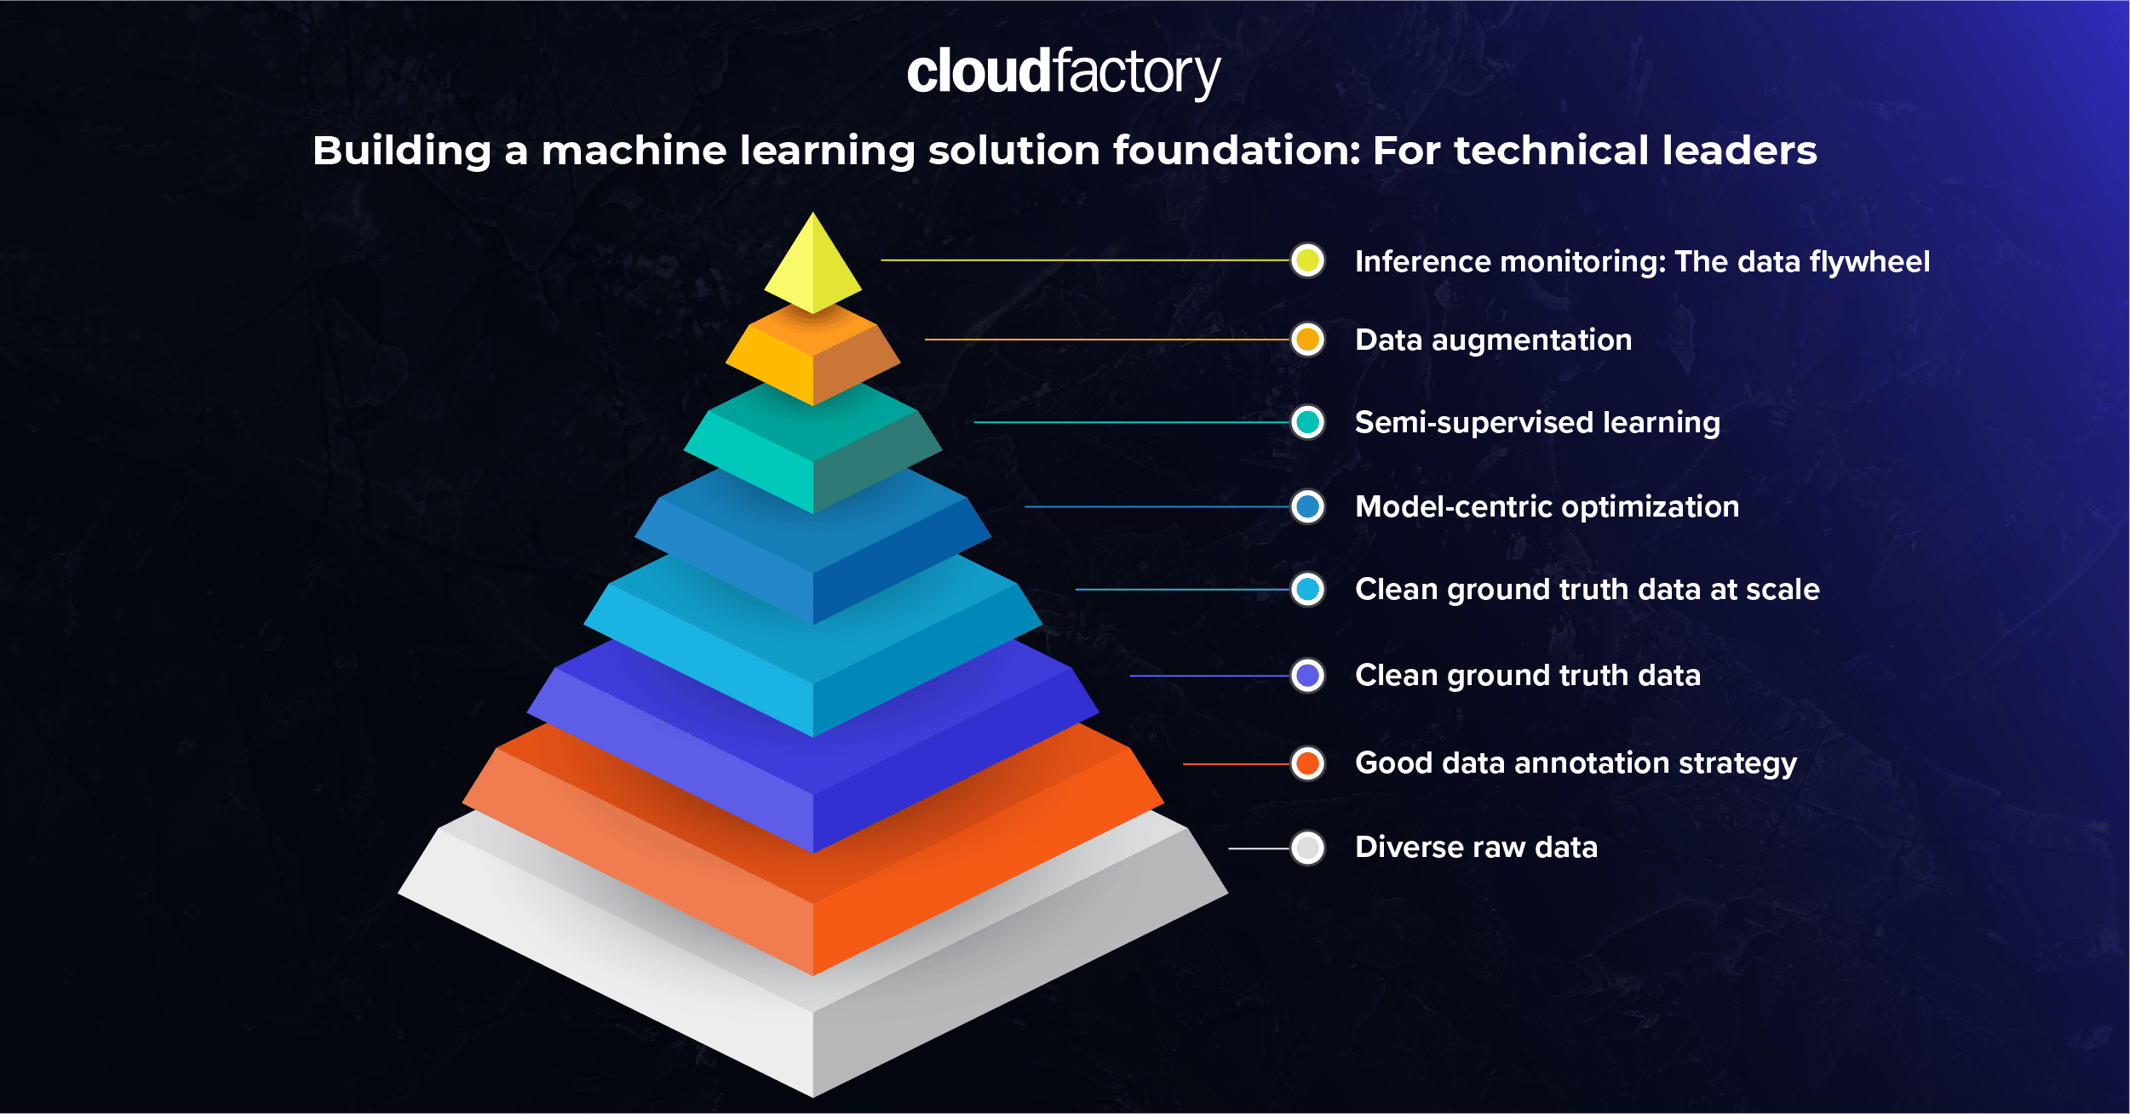 An image depicting the machine learning solution foundation for technical leaders.